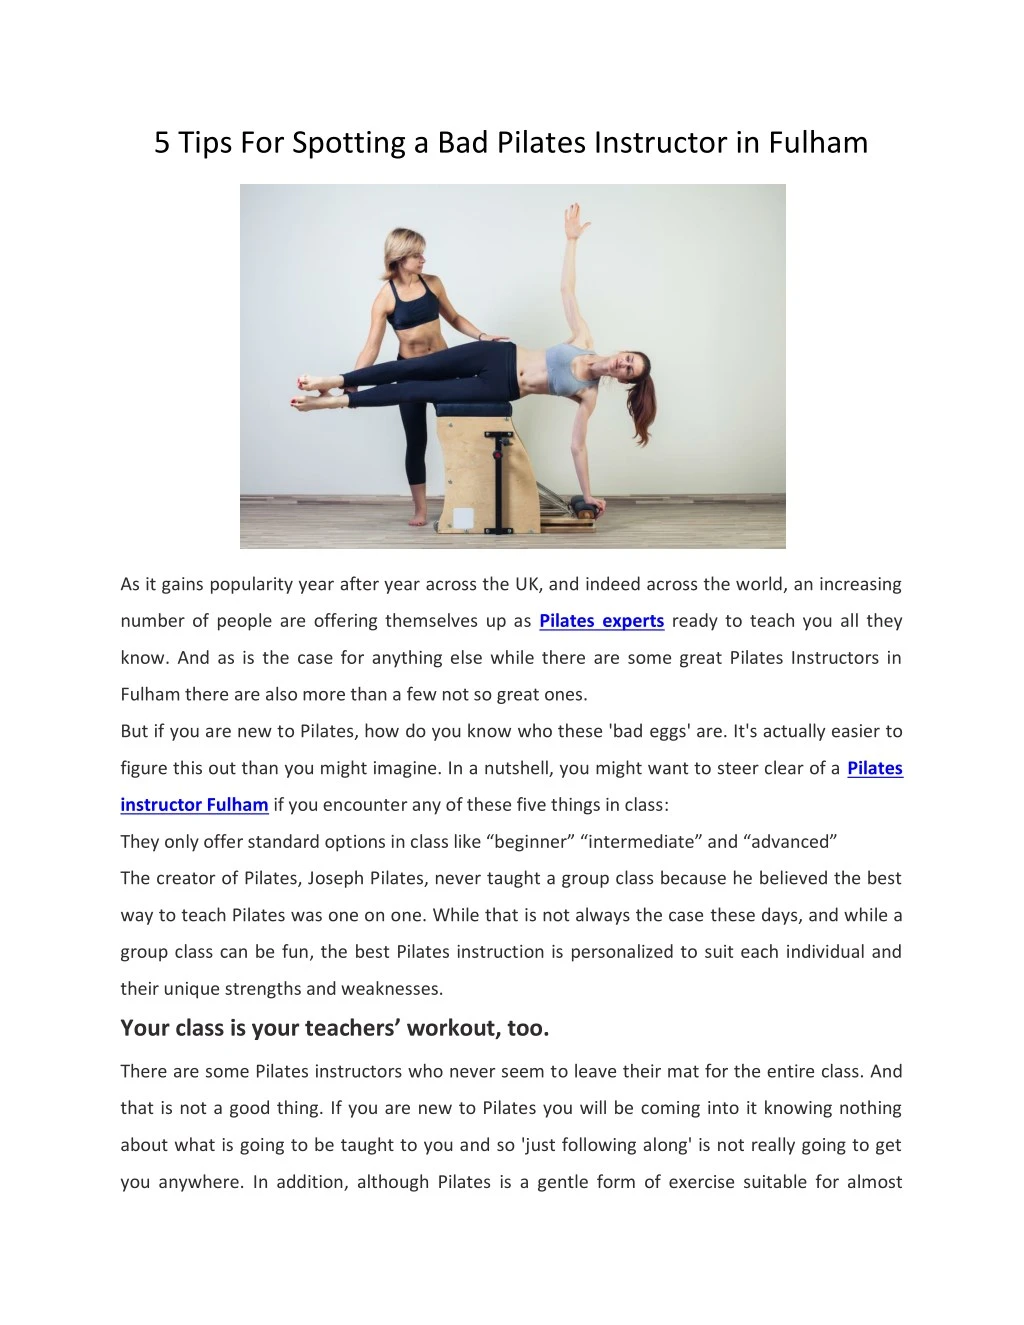 5 tips for spotting a bad pilates instructor